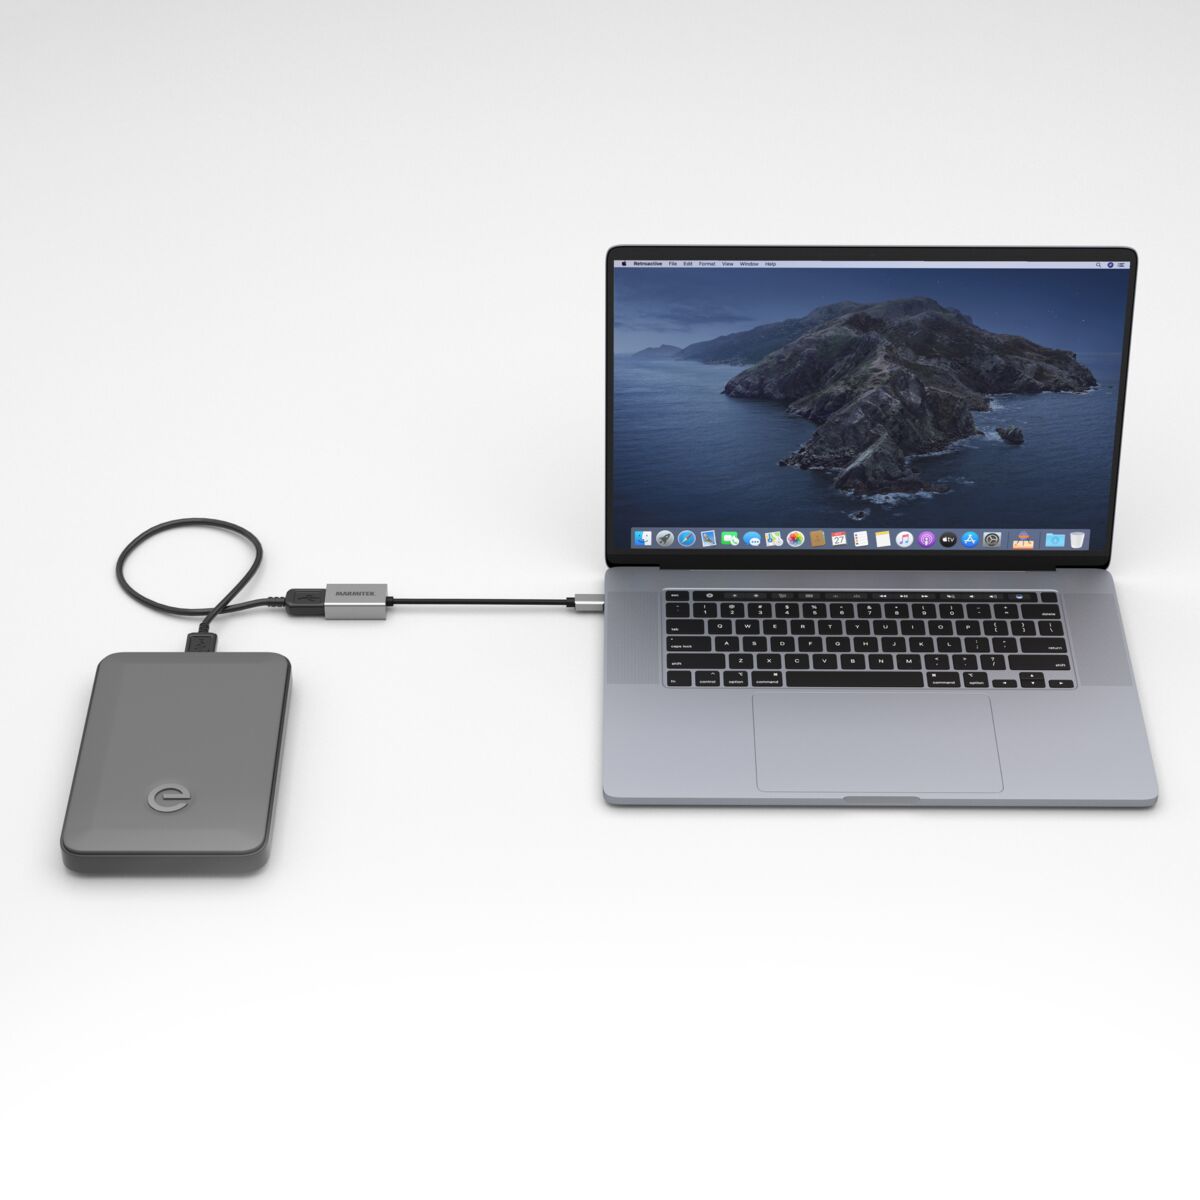 USB-C to USB-A adapter - Ambiance Image of an external hard disk connected to a laptop using an USB-C to USB-A adapter | Marmitek